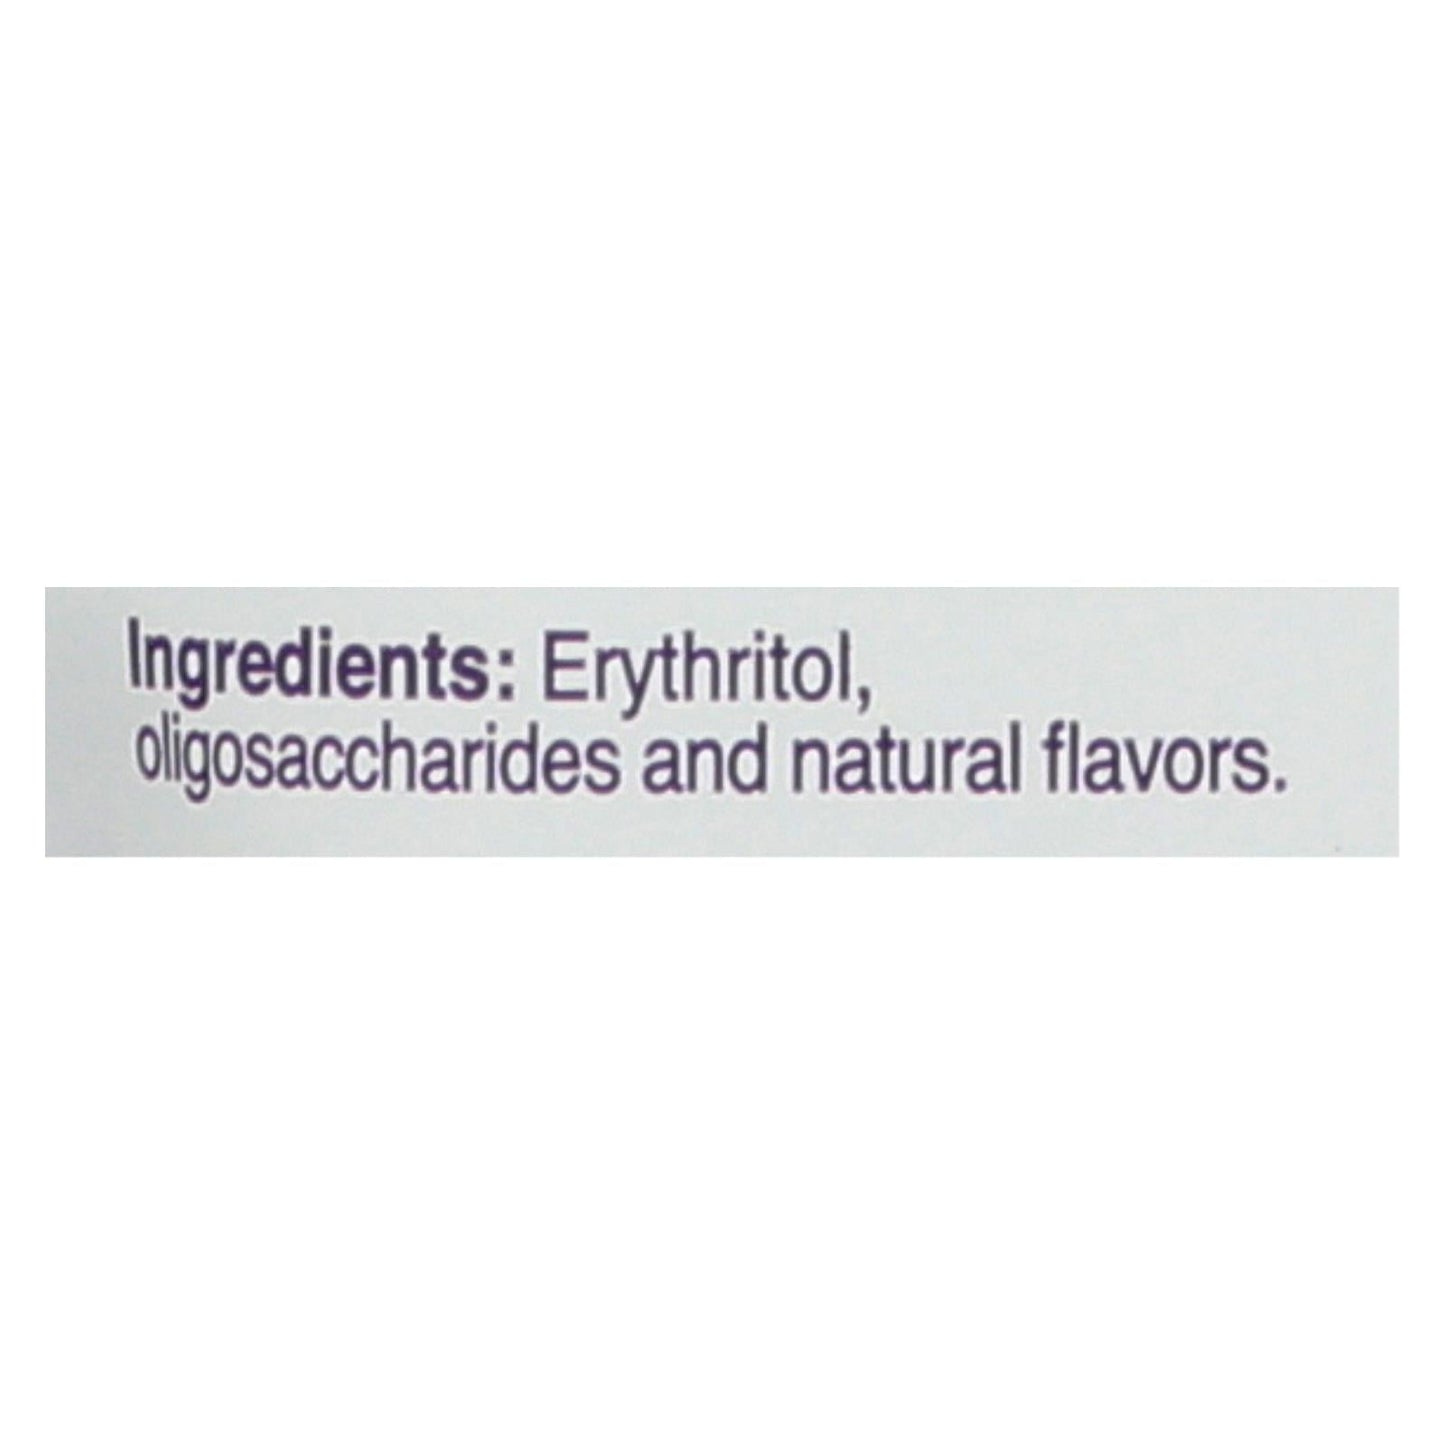 Buy Swerve - Sweetener - Confectioners - Case Of 6 - 12 Oz.  at OnlyNaturals.us